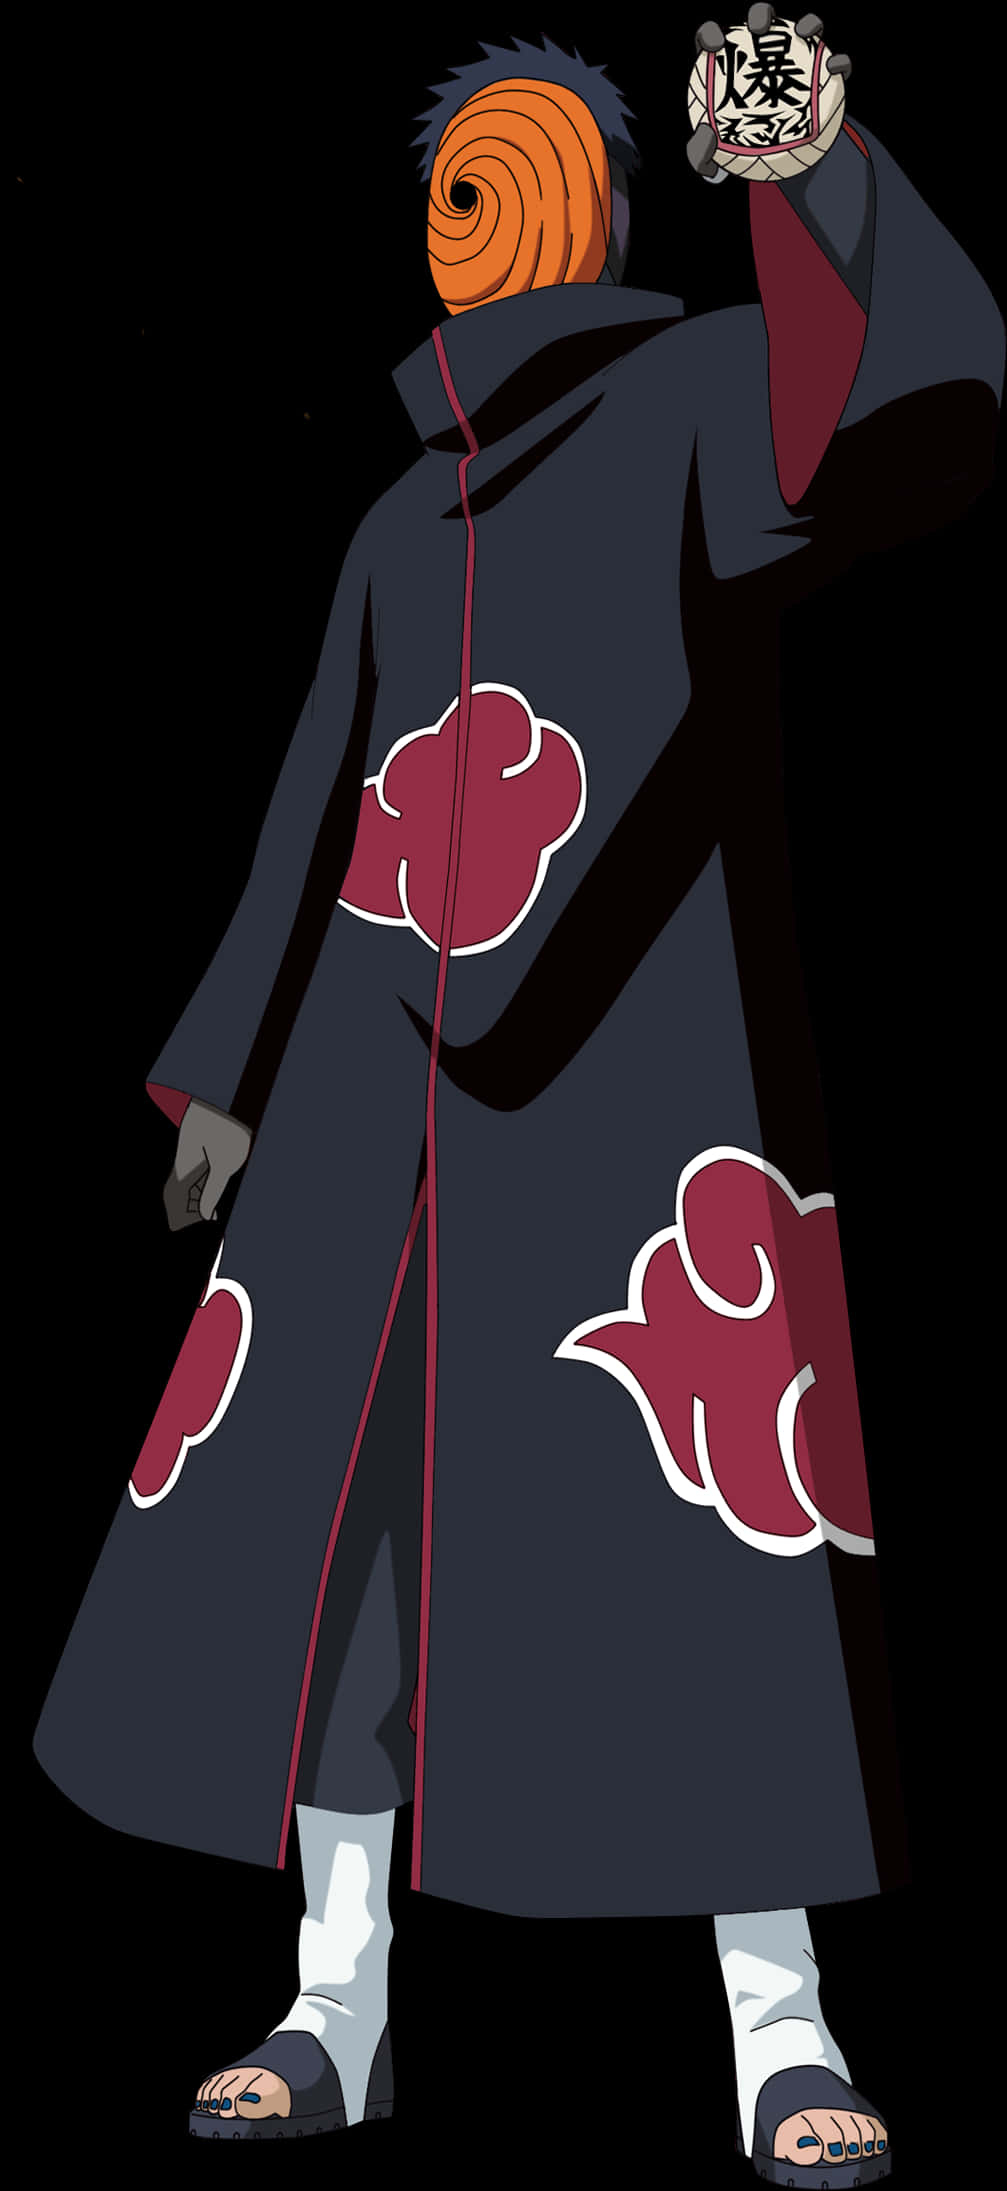 A Cartoon Of A Person Wearing A Long Robe